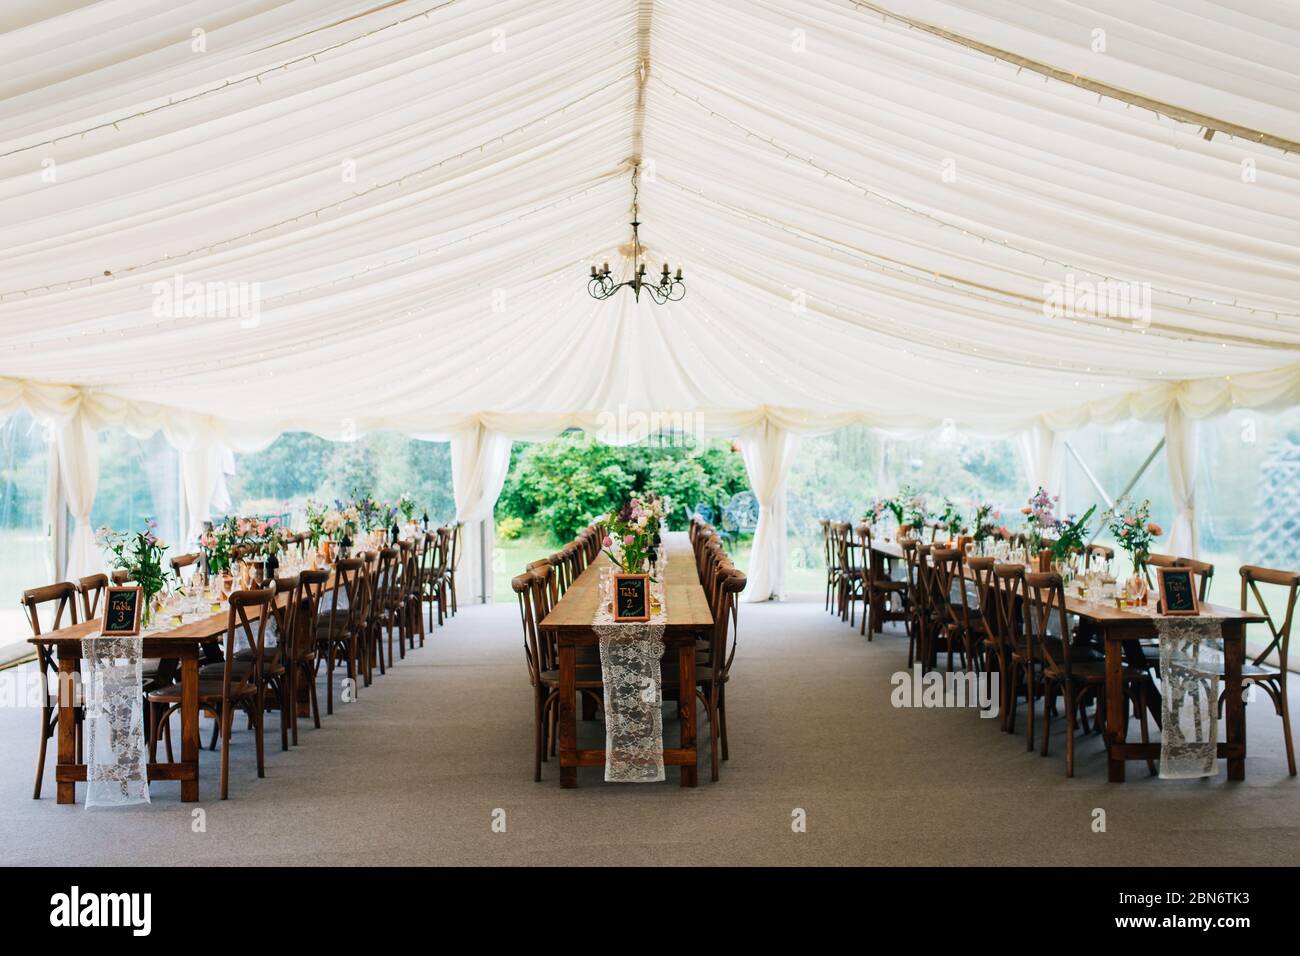 an empty wedding marquee set up and decorated in a rustic style ready for the wedding breakfast. English outdoor wedding Stock Photo